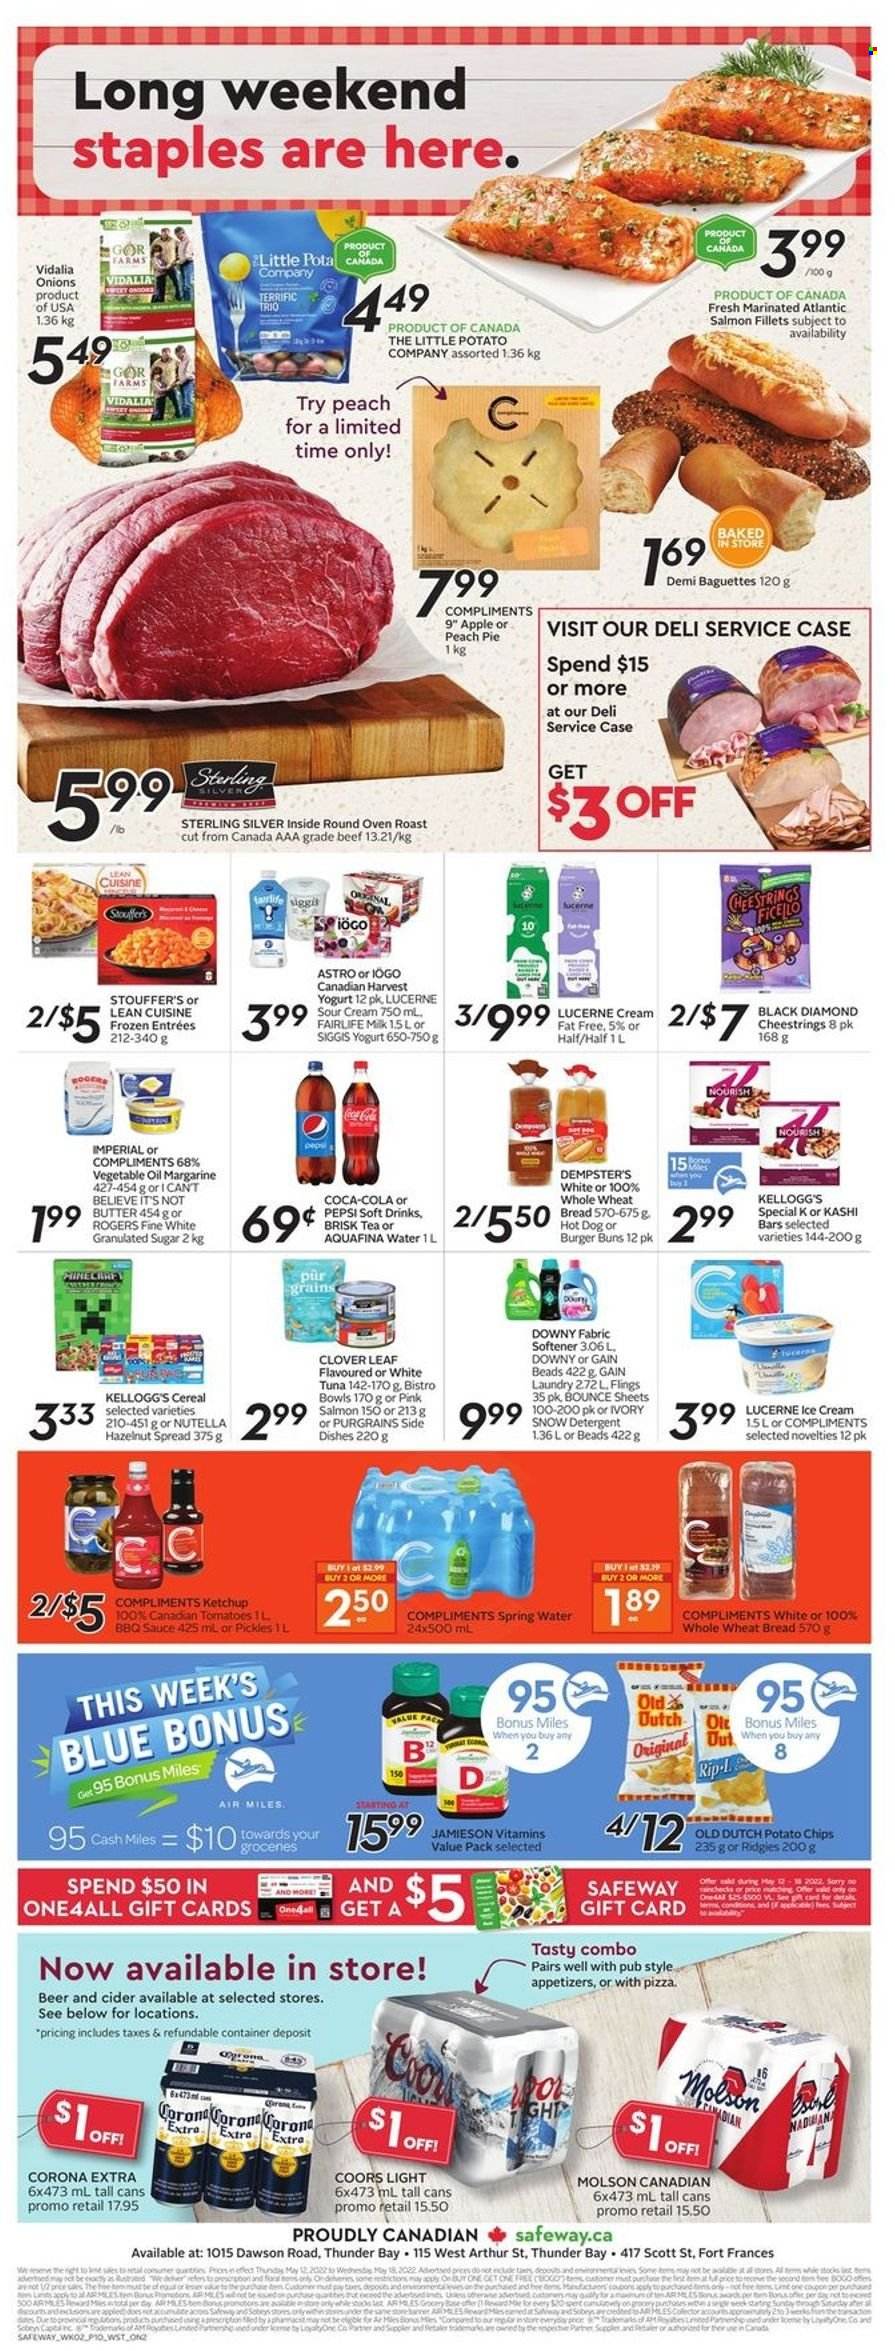 thumbnail - Safeway Flyer - May 12, 2022 - May 18, 2022 - Sales products - wheat bread, pie, burger buns, onion, salmon, salmon fillet, tuna, hot dog, pizza, sauce, Lean Cuisine, string cheese, yoghurt, Clover, milk, butter, margarine, sour cream, ice cream, Stouffer's, Kellogg's, potato chips, granulated sugar, sugar, pickles, cereals, BBQ sauce, vegetable oil, oil, hazelnut spread, Coca-Cola, Pepsi, soft drink, Aquafina, spring water, tea, L'Or, cider, beer, Corona Extra, Scott, Gain, fabric softener, Bounce, Downy Laundry, baguette, detergent, ketchup, Nutella, Coors. Page 2.